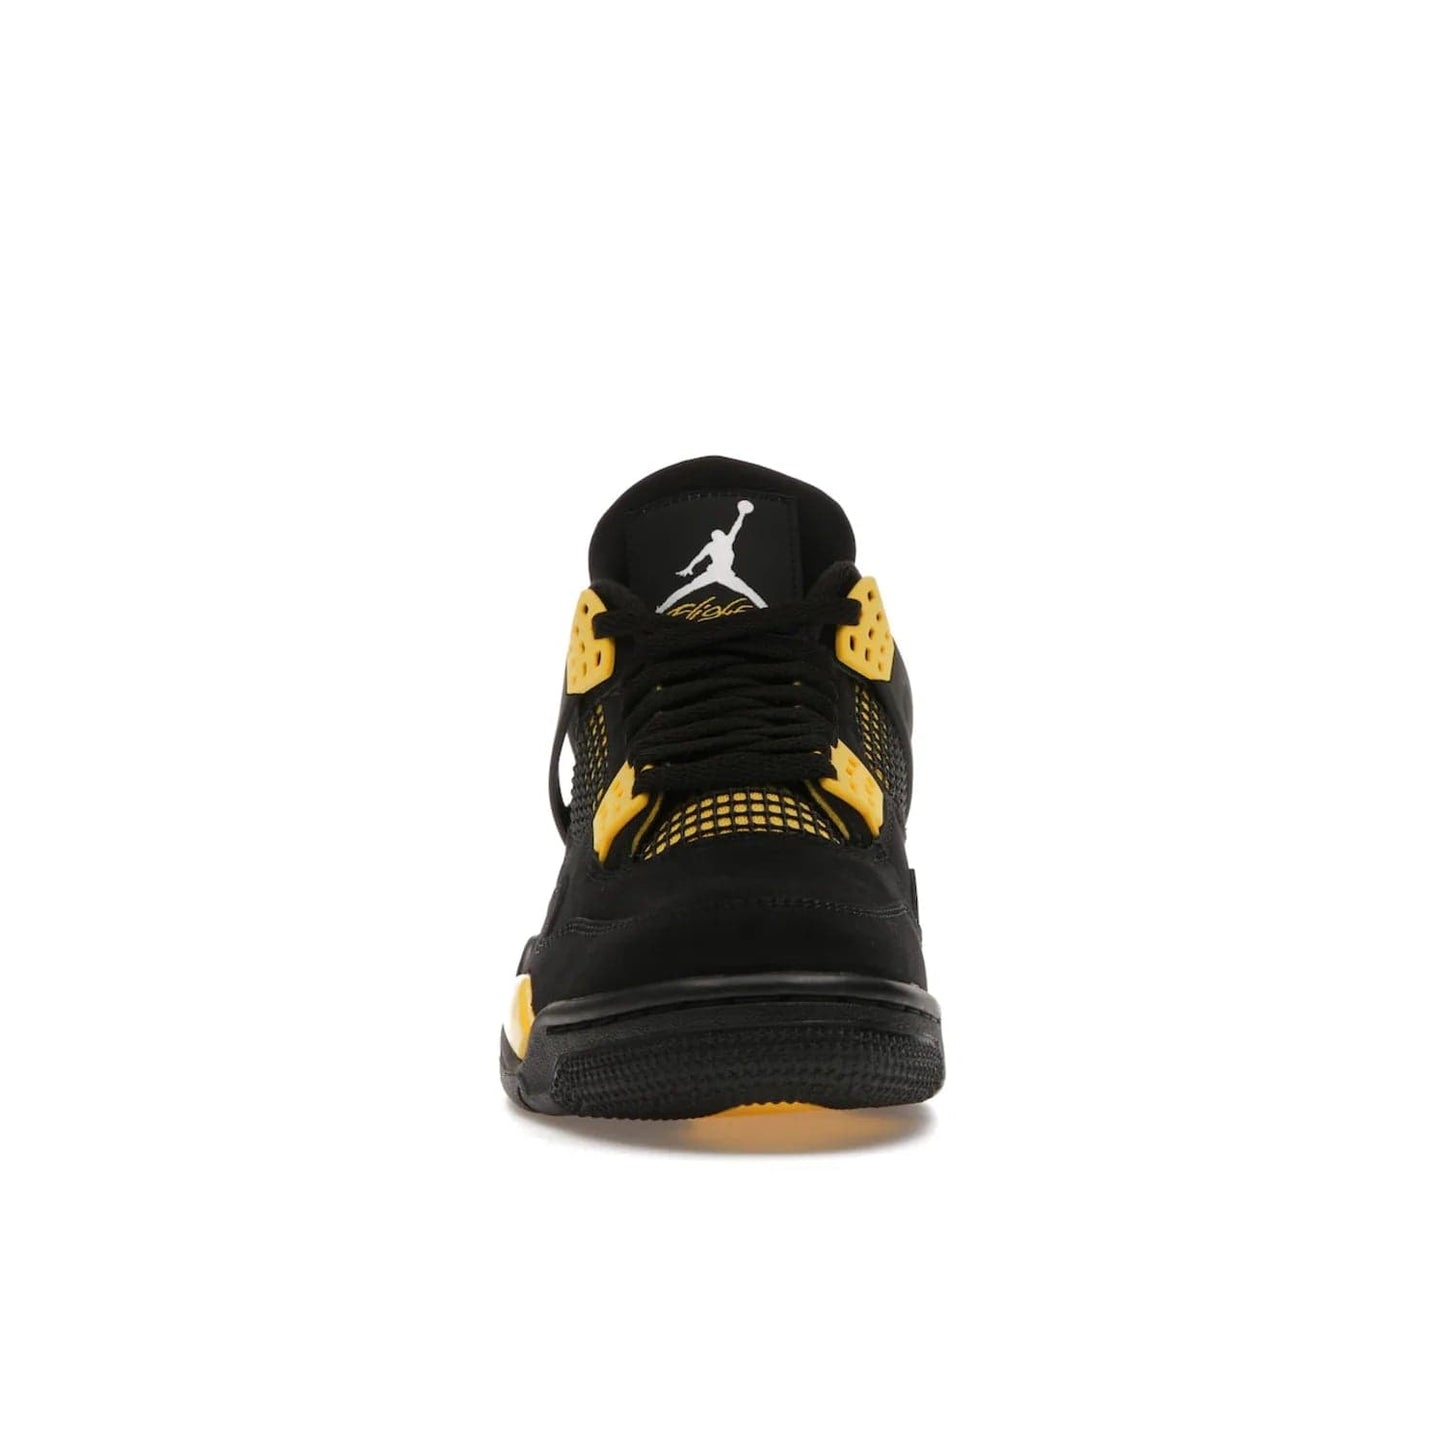 Jordan 4 Retro Thunder (2023) - Image 10 - Only at www.BallersClubKickz.com - Iconic Air Jordan 4 Retro Thunder (2023) returns with black nubuck upper and Tour Yellow details. Featuring Jumpman logo on heel tab, tongue and insoles. Dropping May 13th, 2023.